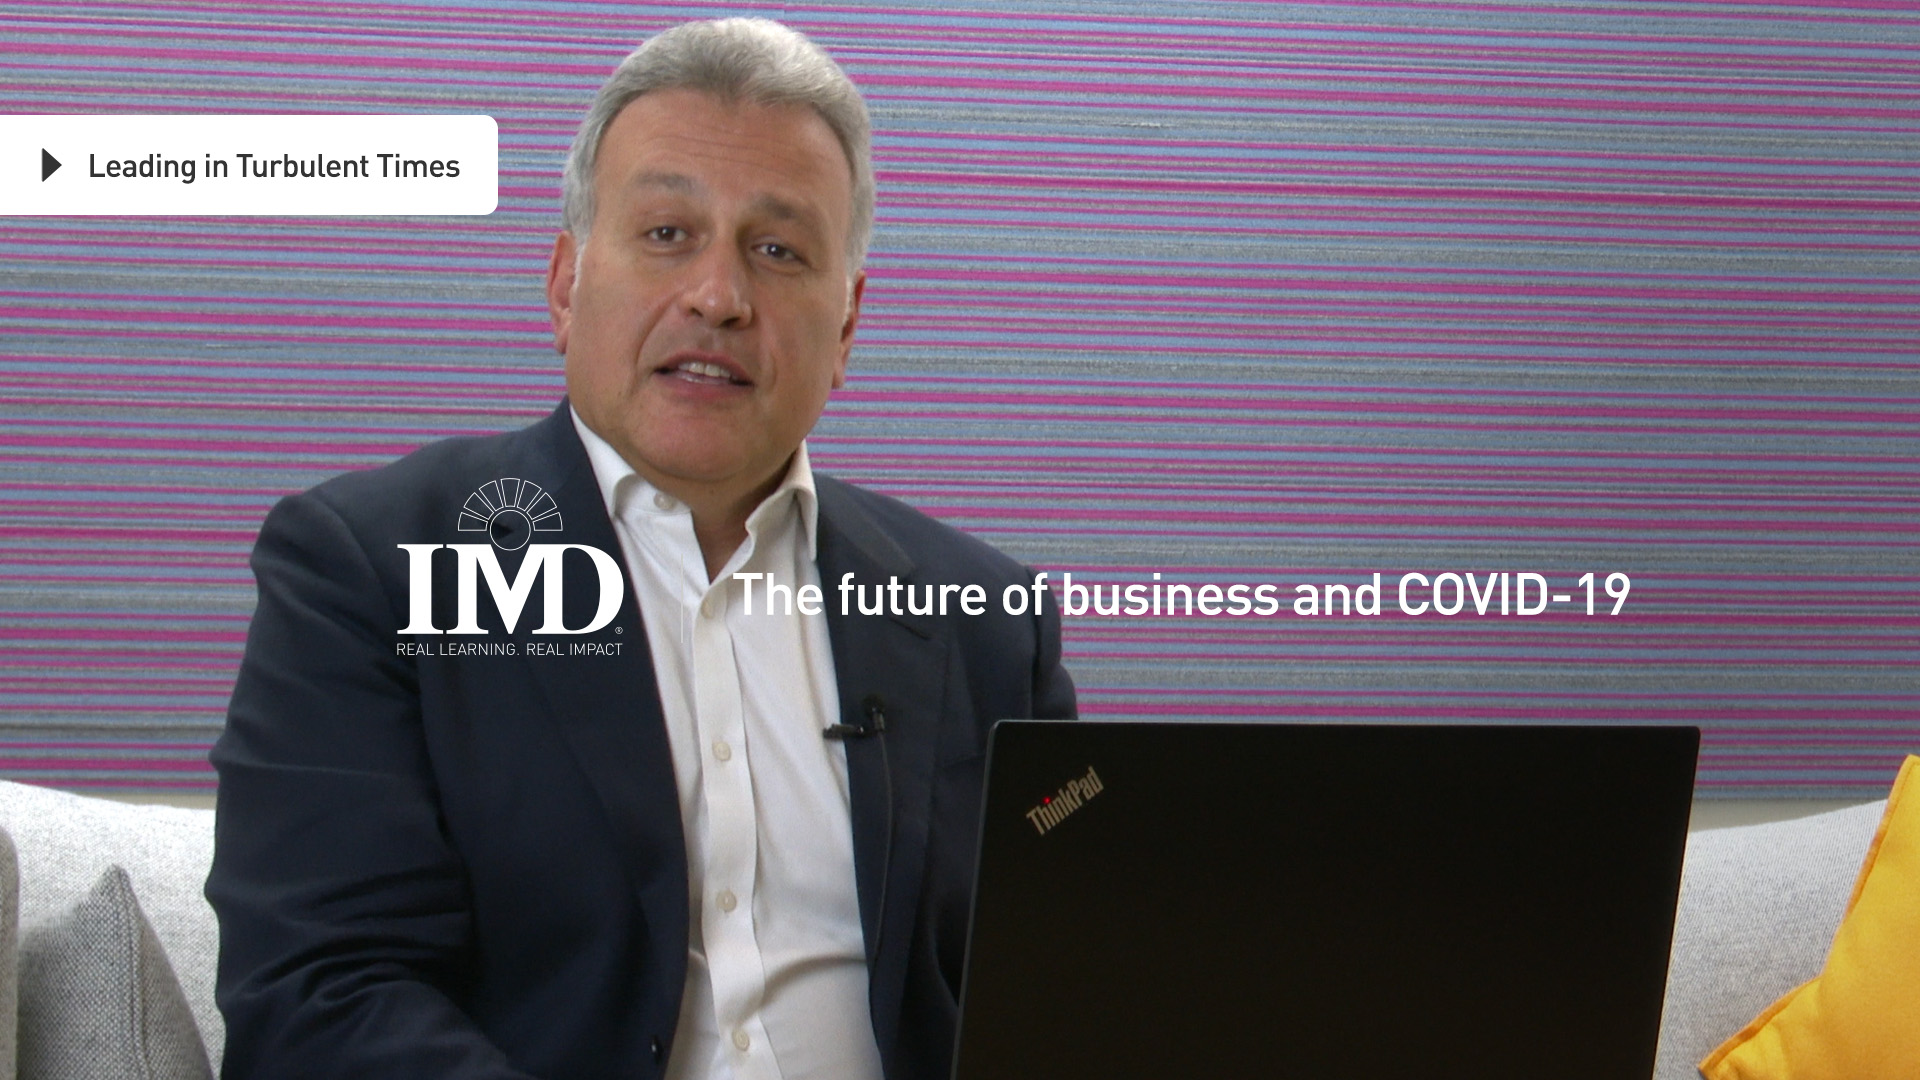 The future of business and COVID-19